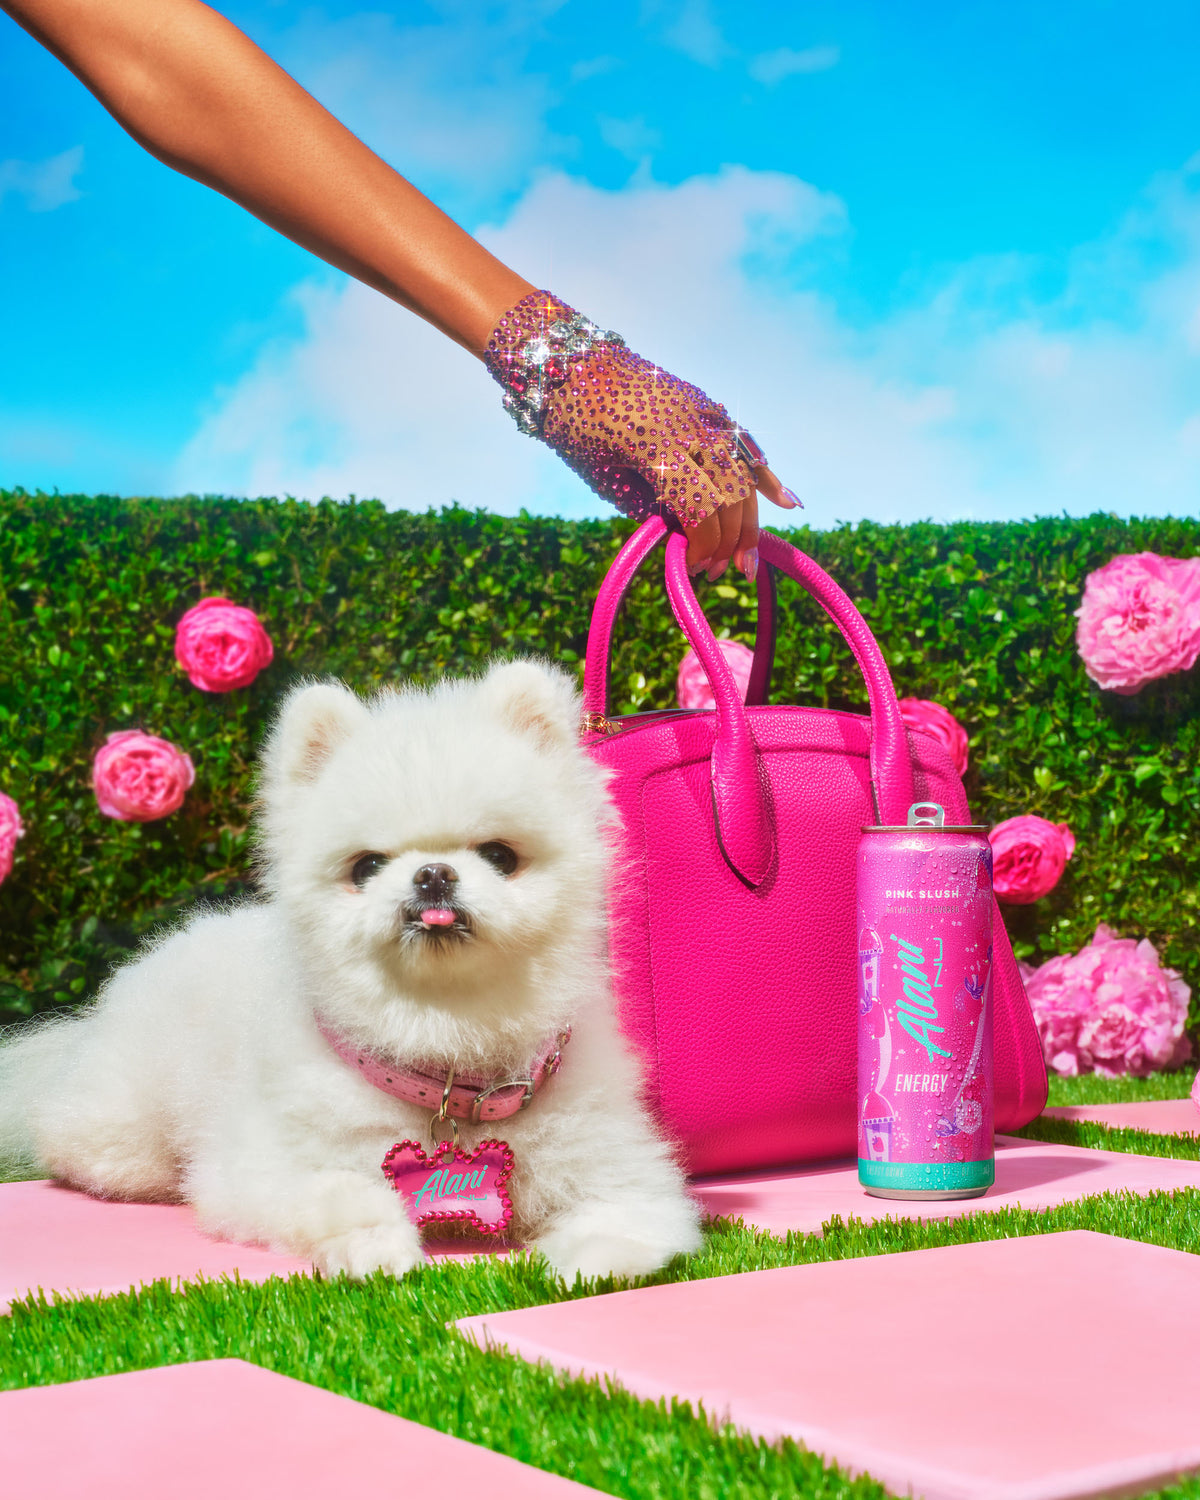 A miniature white Pomeranian dog next to an Alani Nu Pink Slush Energy Drink can and pink purse. A bedazzled gloved hand reaches in, holding the purse handles. 